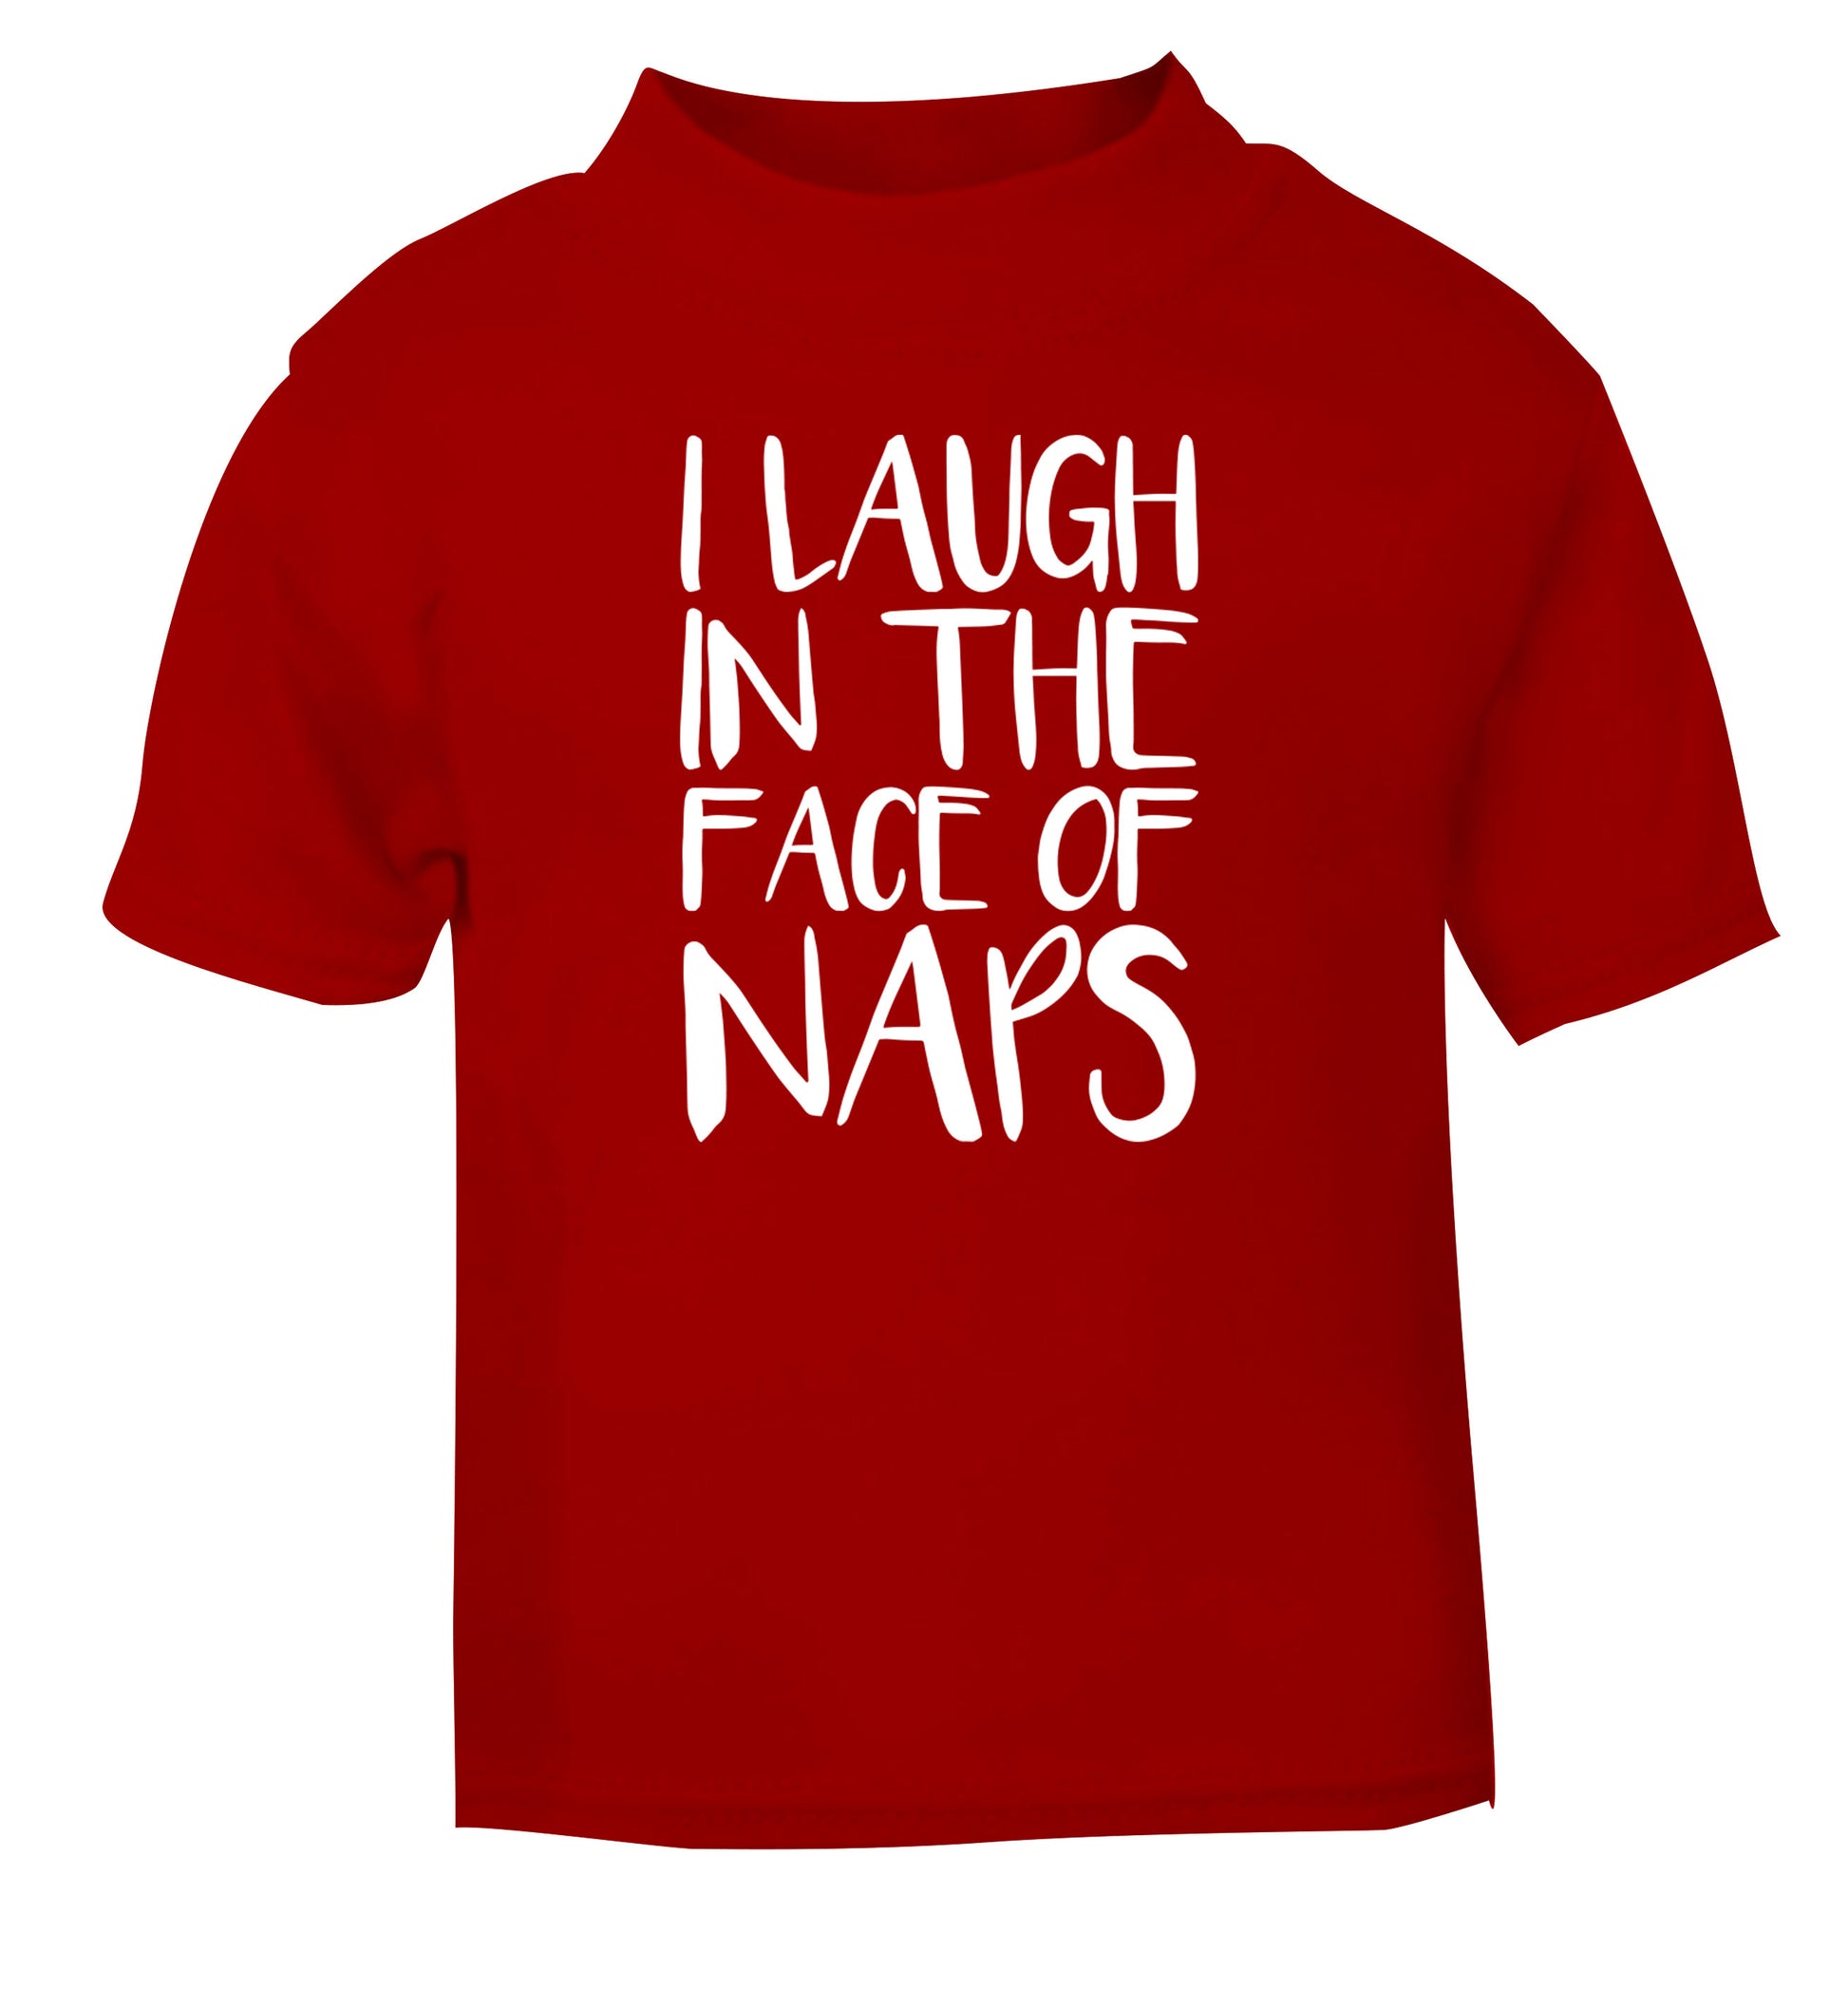 I laugh in the face of naps red Baby Toddler Tshirt 2 Years